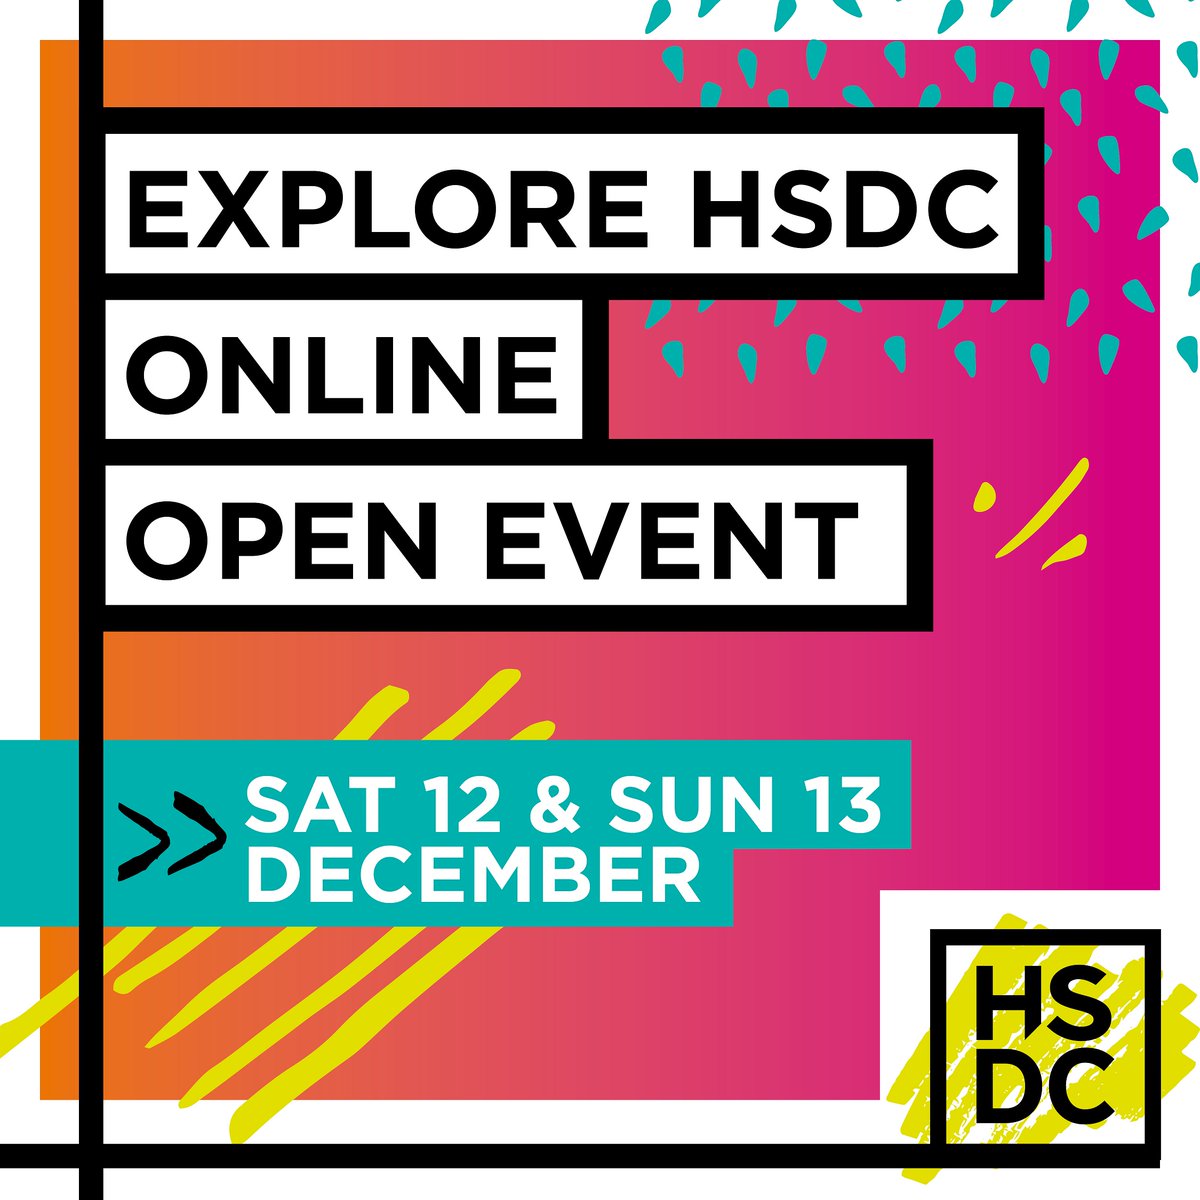 Already thinking about plans for next weekend? Why not explore our online Open Events on 12 and 13 December. Discover more information about what it's like to study at HSDC with our course videos and take a tour of our campuses or explore our 360 guide. 👍